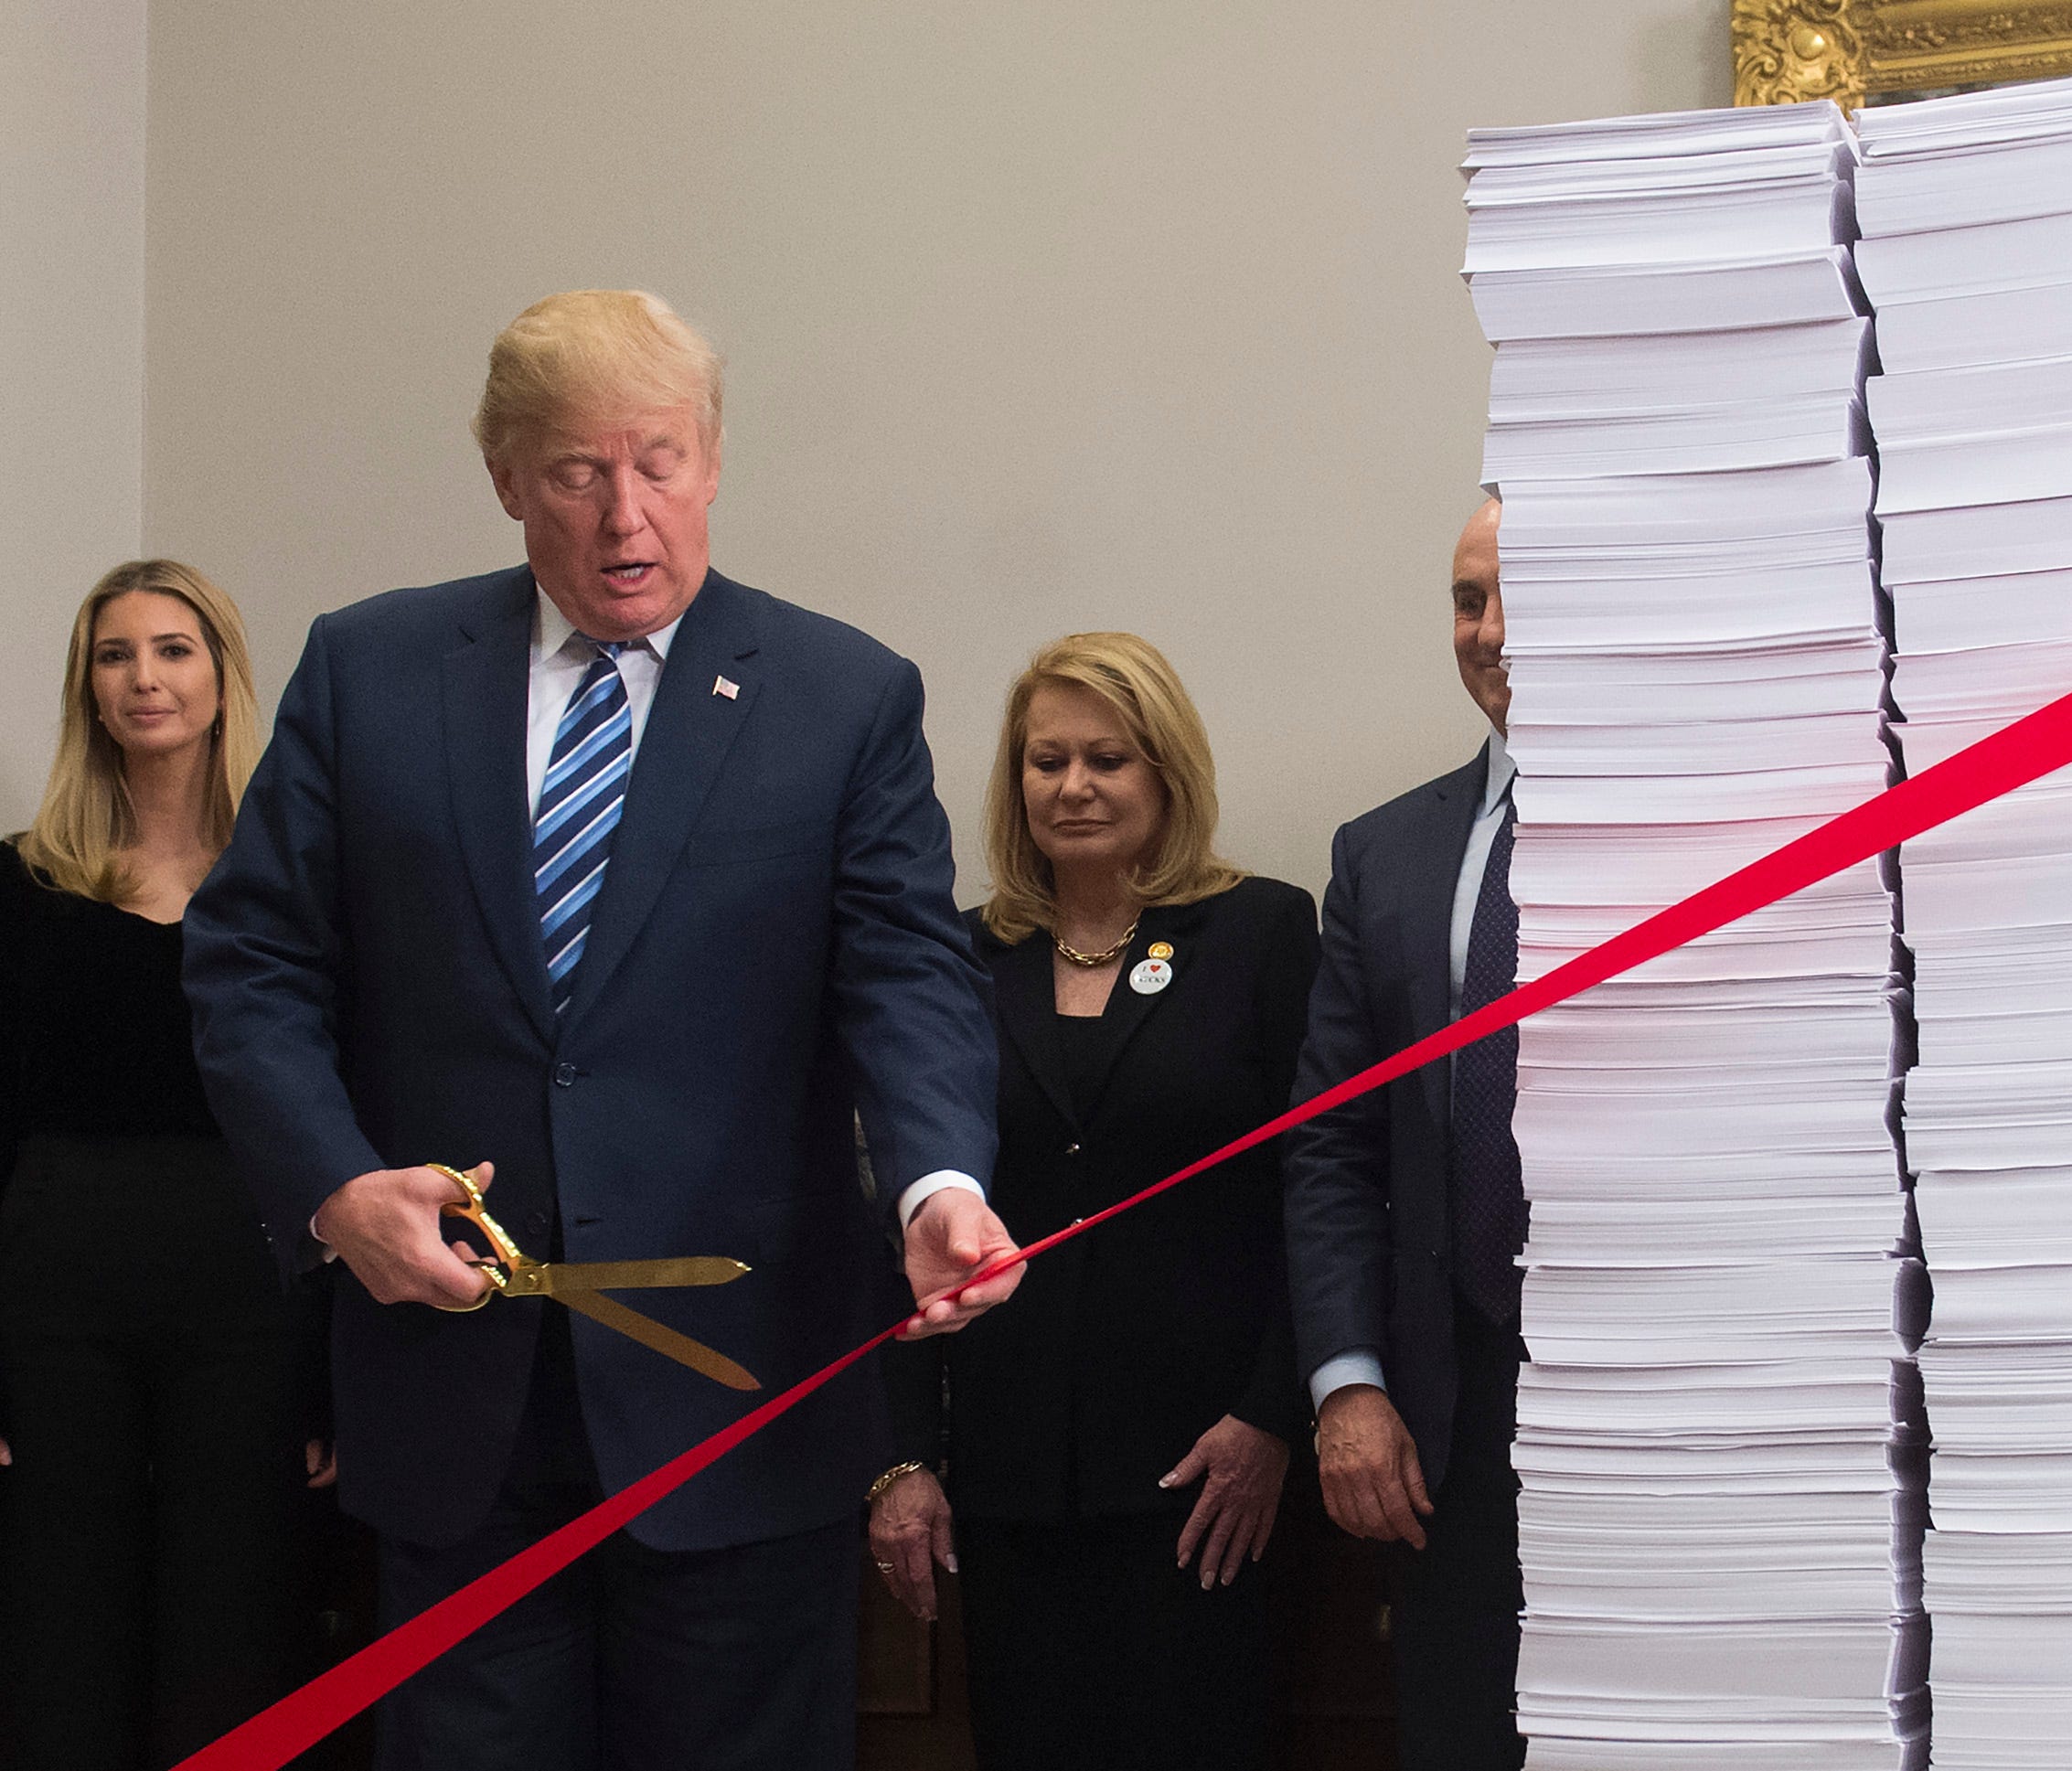 President Trump holds gold scissors Thursday as he cuts a red tape tied between two stacks of papers representing the government regulations of the 1960s and the regulations of today.